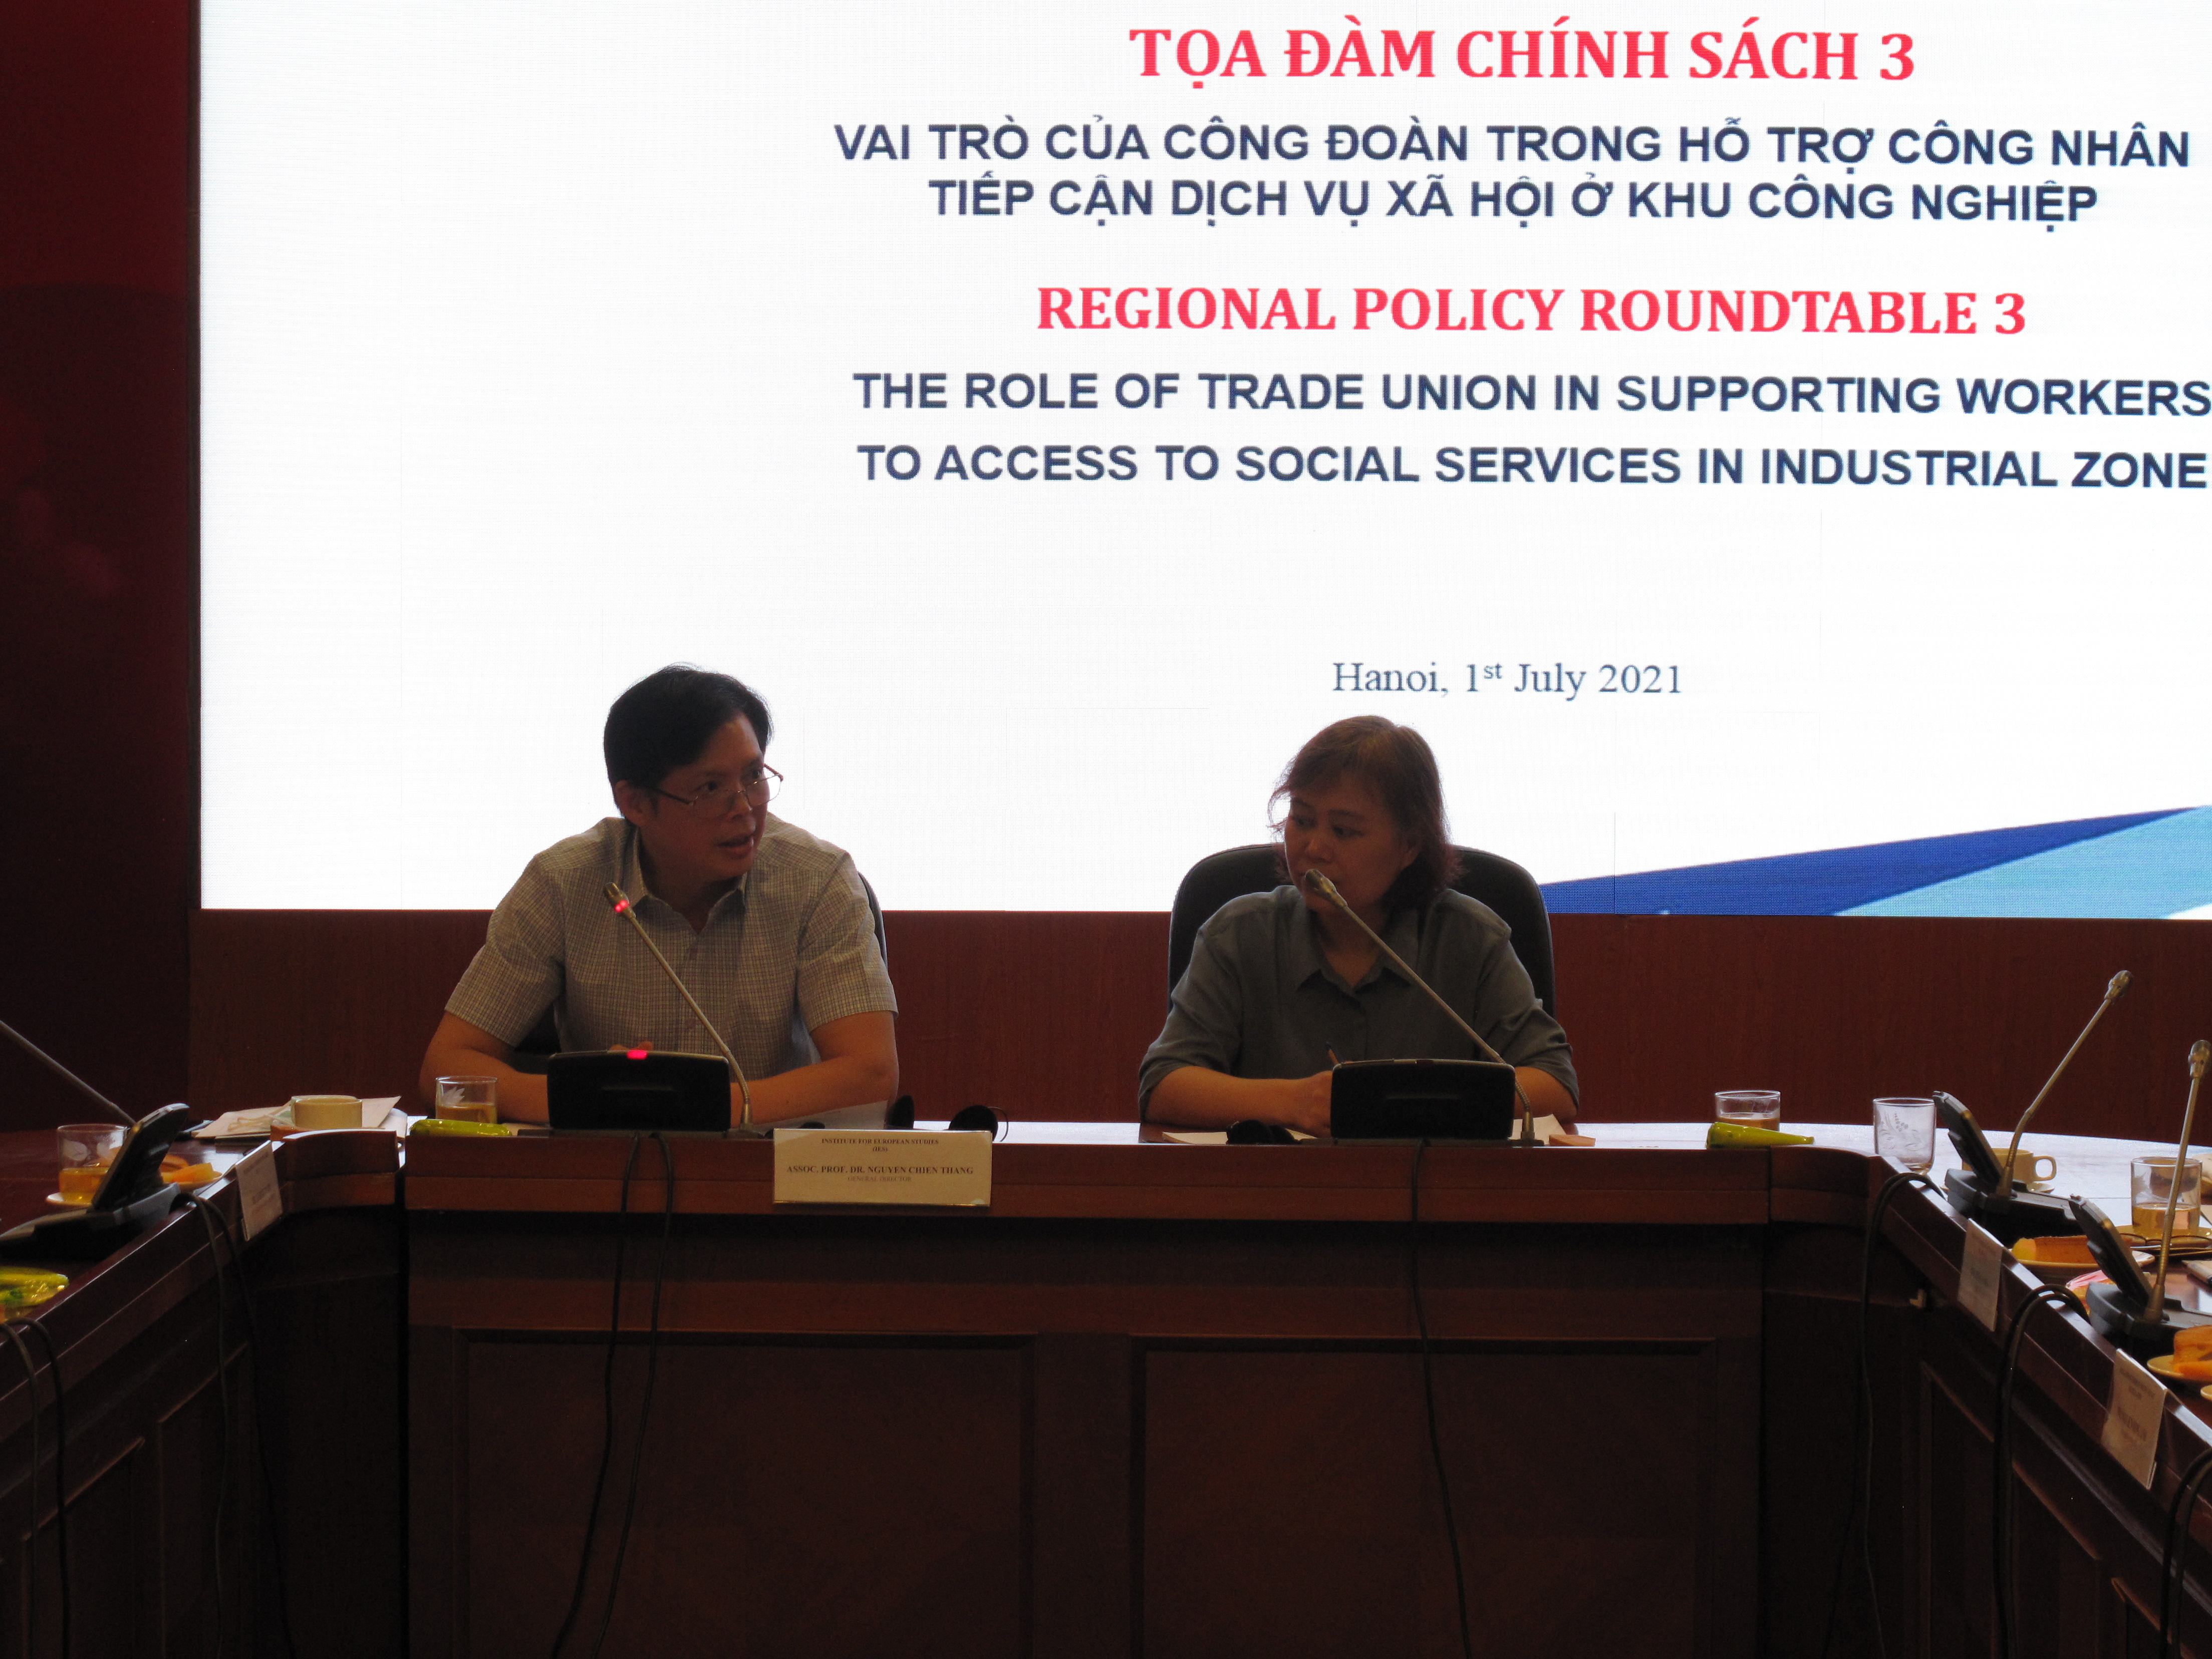 Assoc.Prof.Dr. Nguyen Chien Thang, Director of the Institute of European Studies and Dr. Pham Thi Thu Lan, Deputy Director of the Institute of Workers and Trade Union co-chaired the seminar